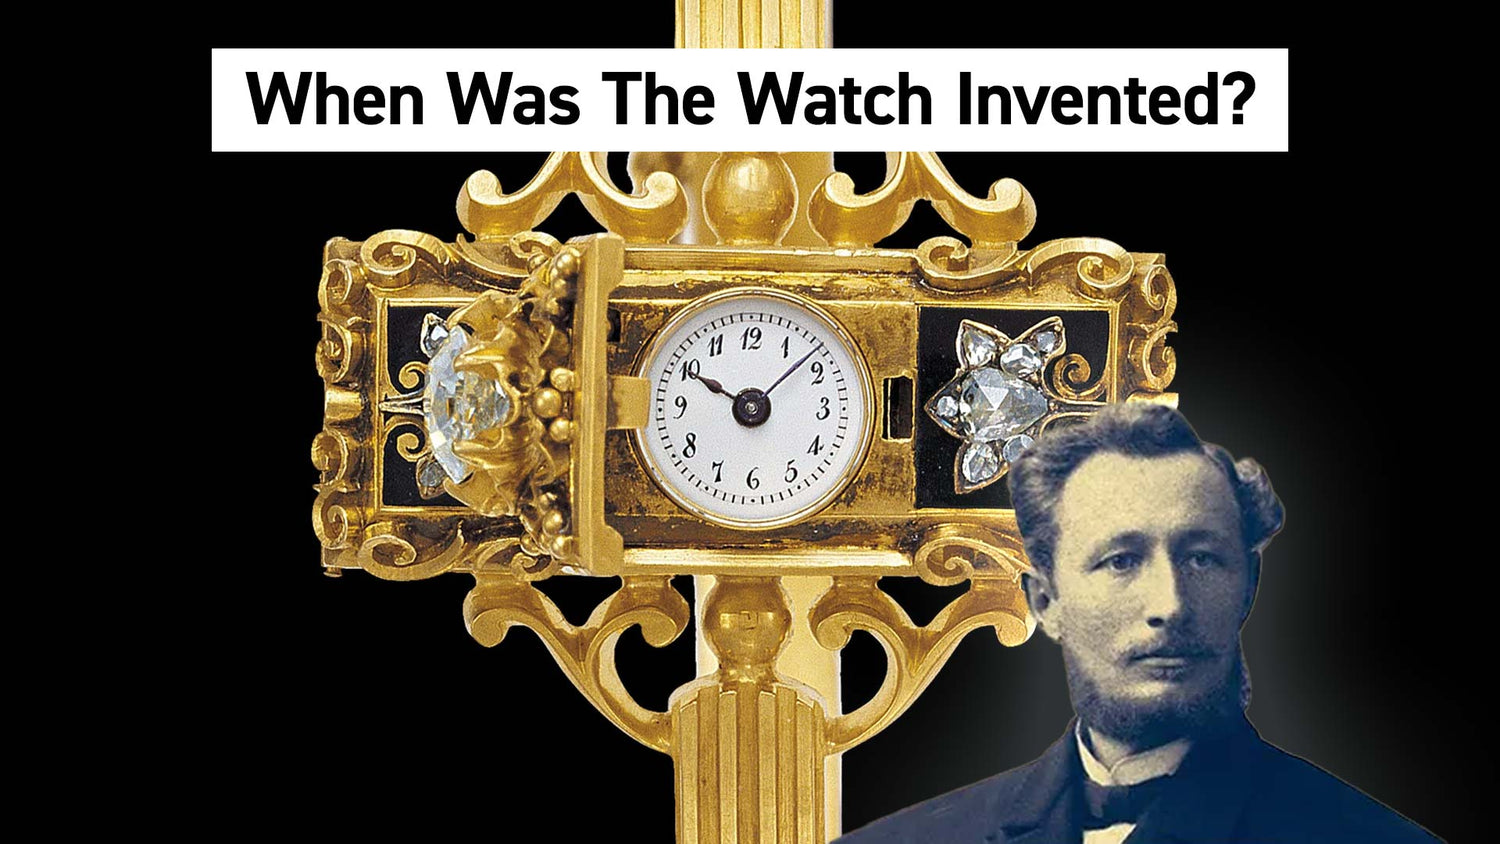 When Was The Watch Invented?